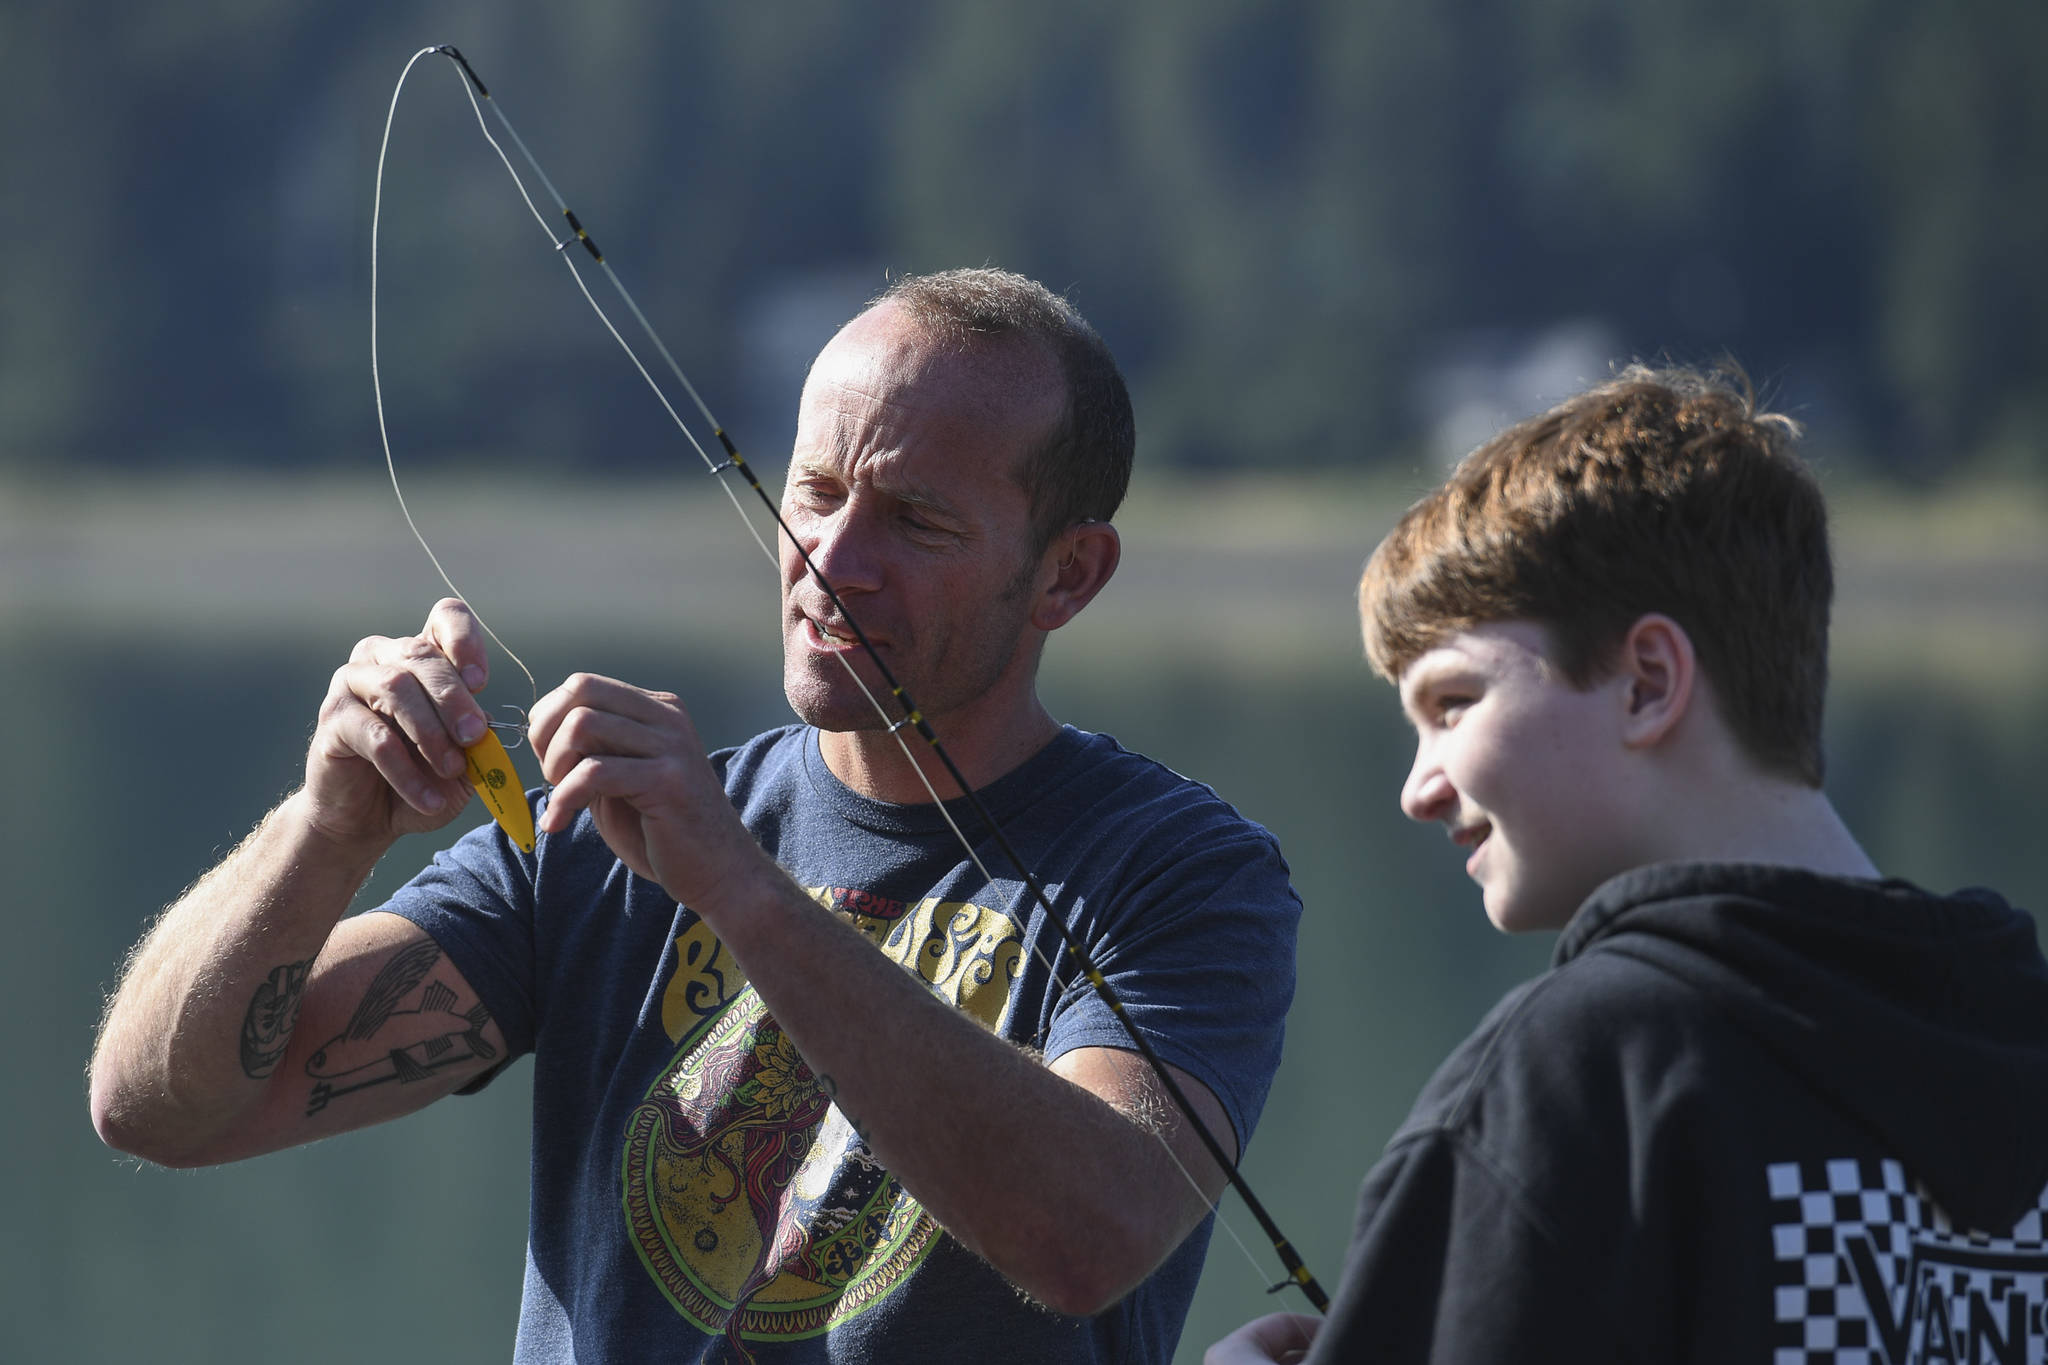 Dzantik’i Heeni Middle School eighth-grader Riley Kellar, right, is helped by Teacher Bobby Jones while fishing for salmon at the Wayside Park on Channel Drive on Friday, Aug. 30, 2019. The fish will be used in a dog treat business the students are developing to raise money for a water filtering system to be used at the school. Two math teachers, Jones and Tennie Bentz, are having the students start four businesses as a way of teaching the use of math in the real world. (Michael Penn | Juneau Empire)